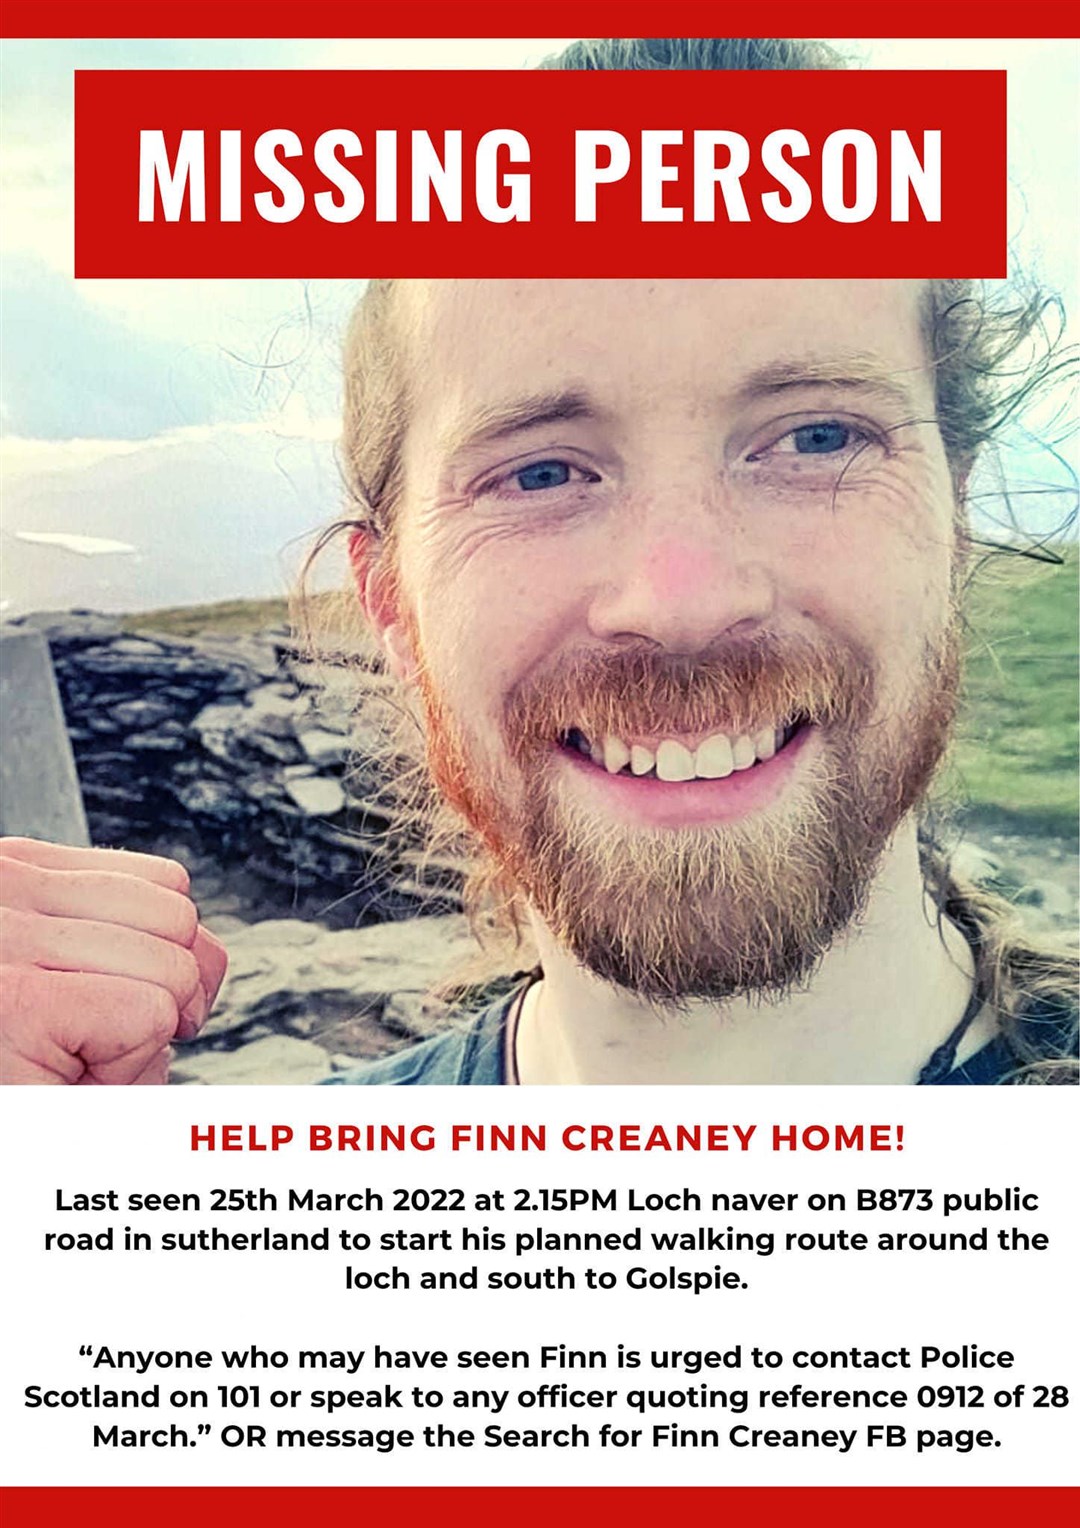 Finn Creaney's family are keen that their appeal for help is shared far and wide.